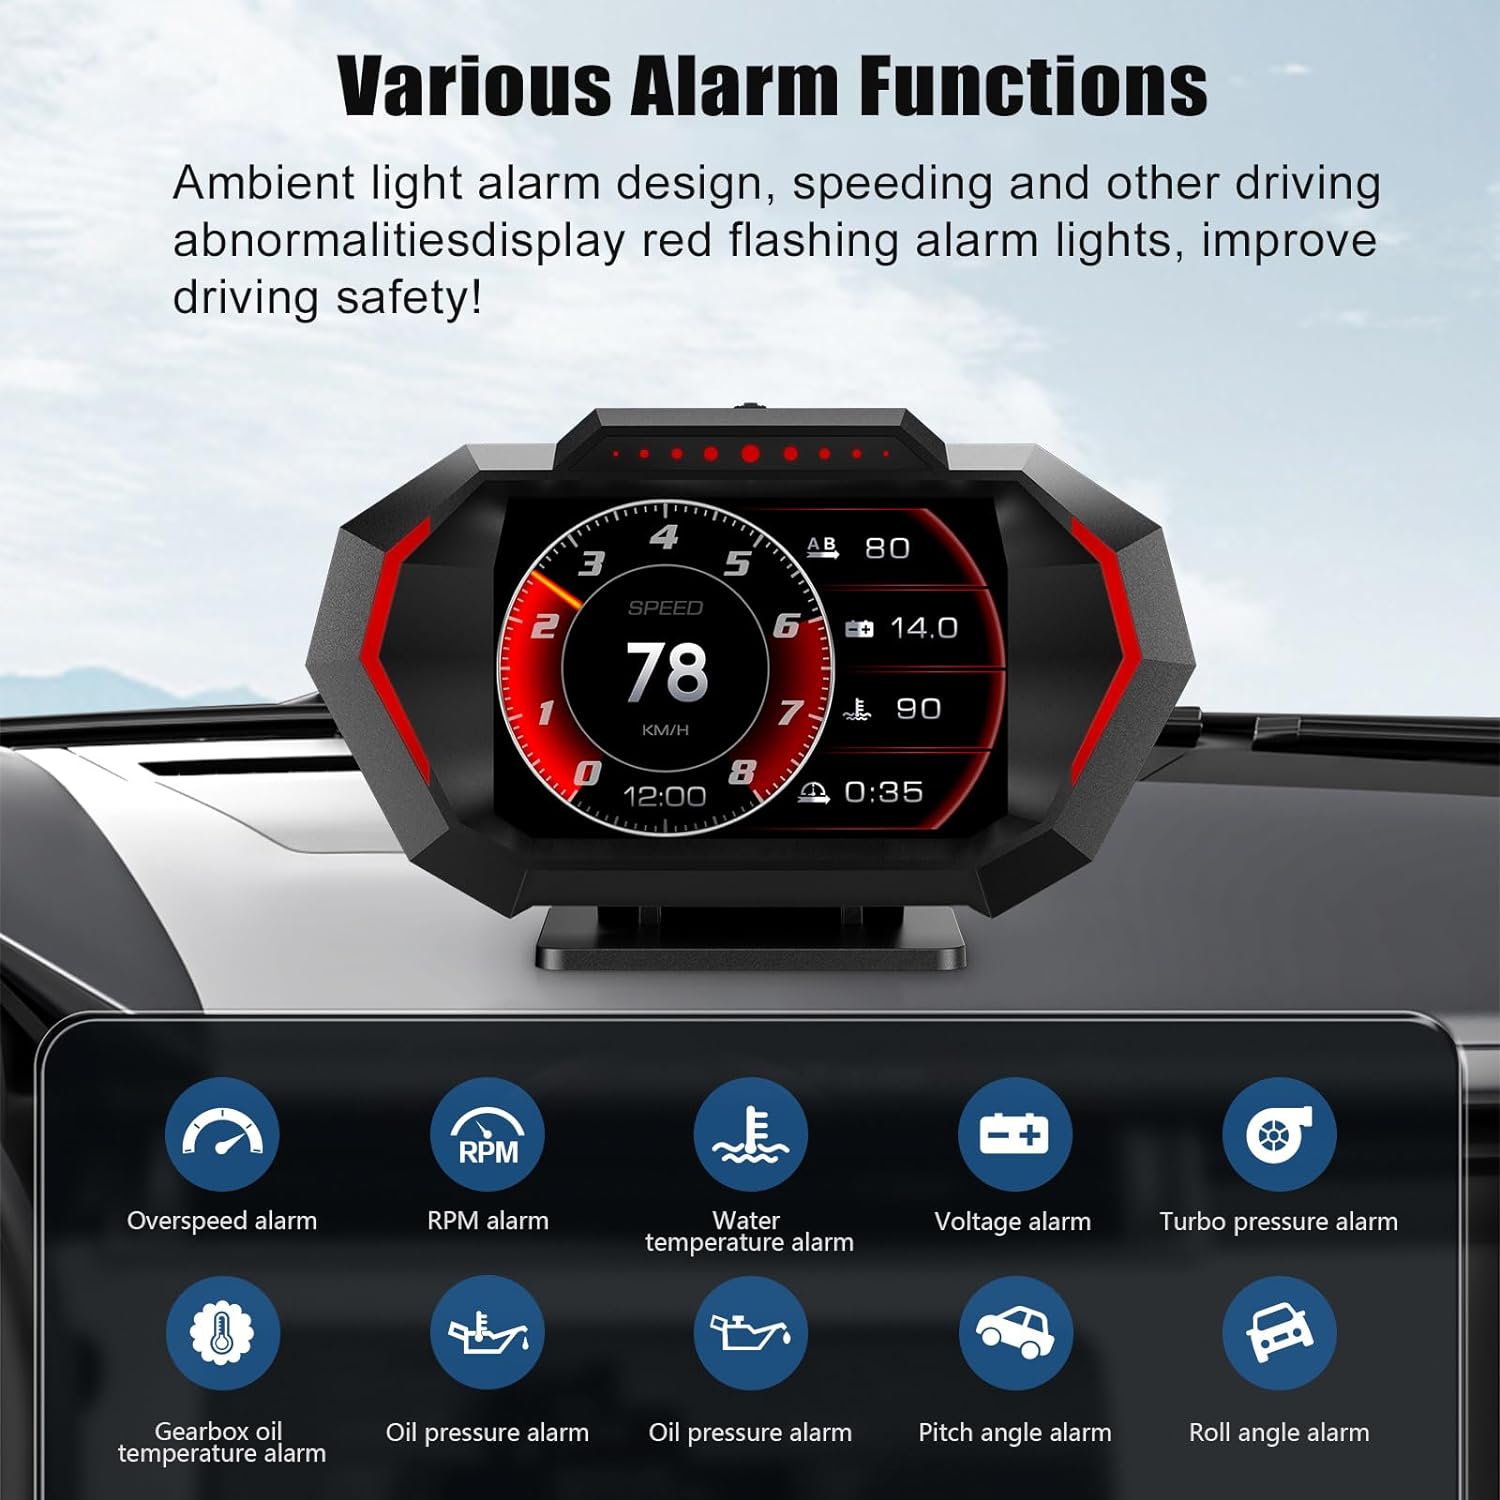 Acteam HUD Heads Up Display for Car, OBD+GPS Multi-Data Monitor Digital Speedometer Head Up Display, Overspeed Alarm RPM Water Temperature Turbo Pressure Smart Gauge for Most Vehicles After 2008